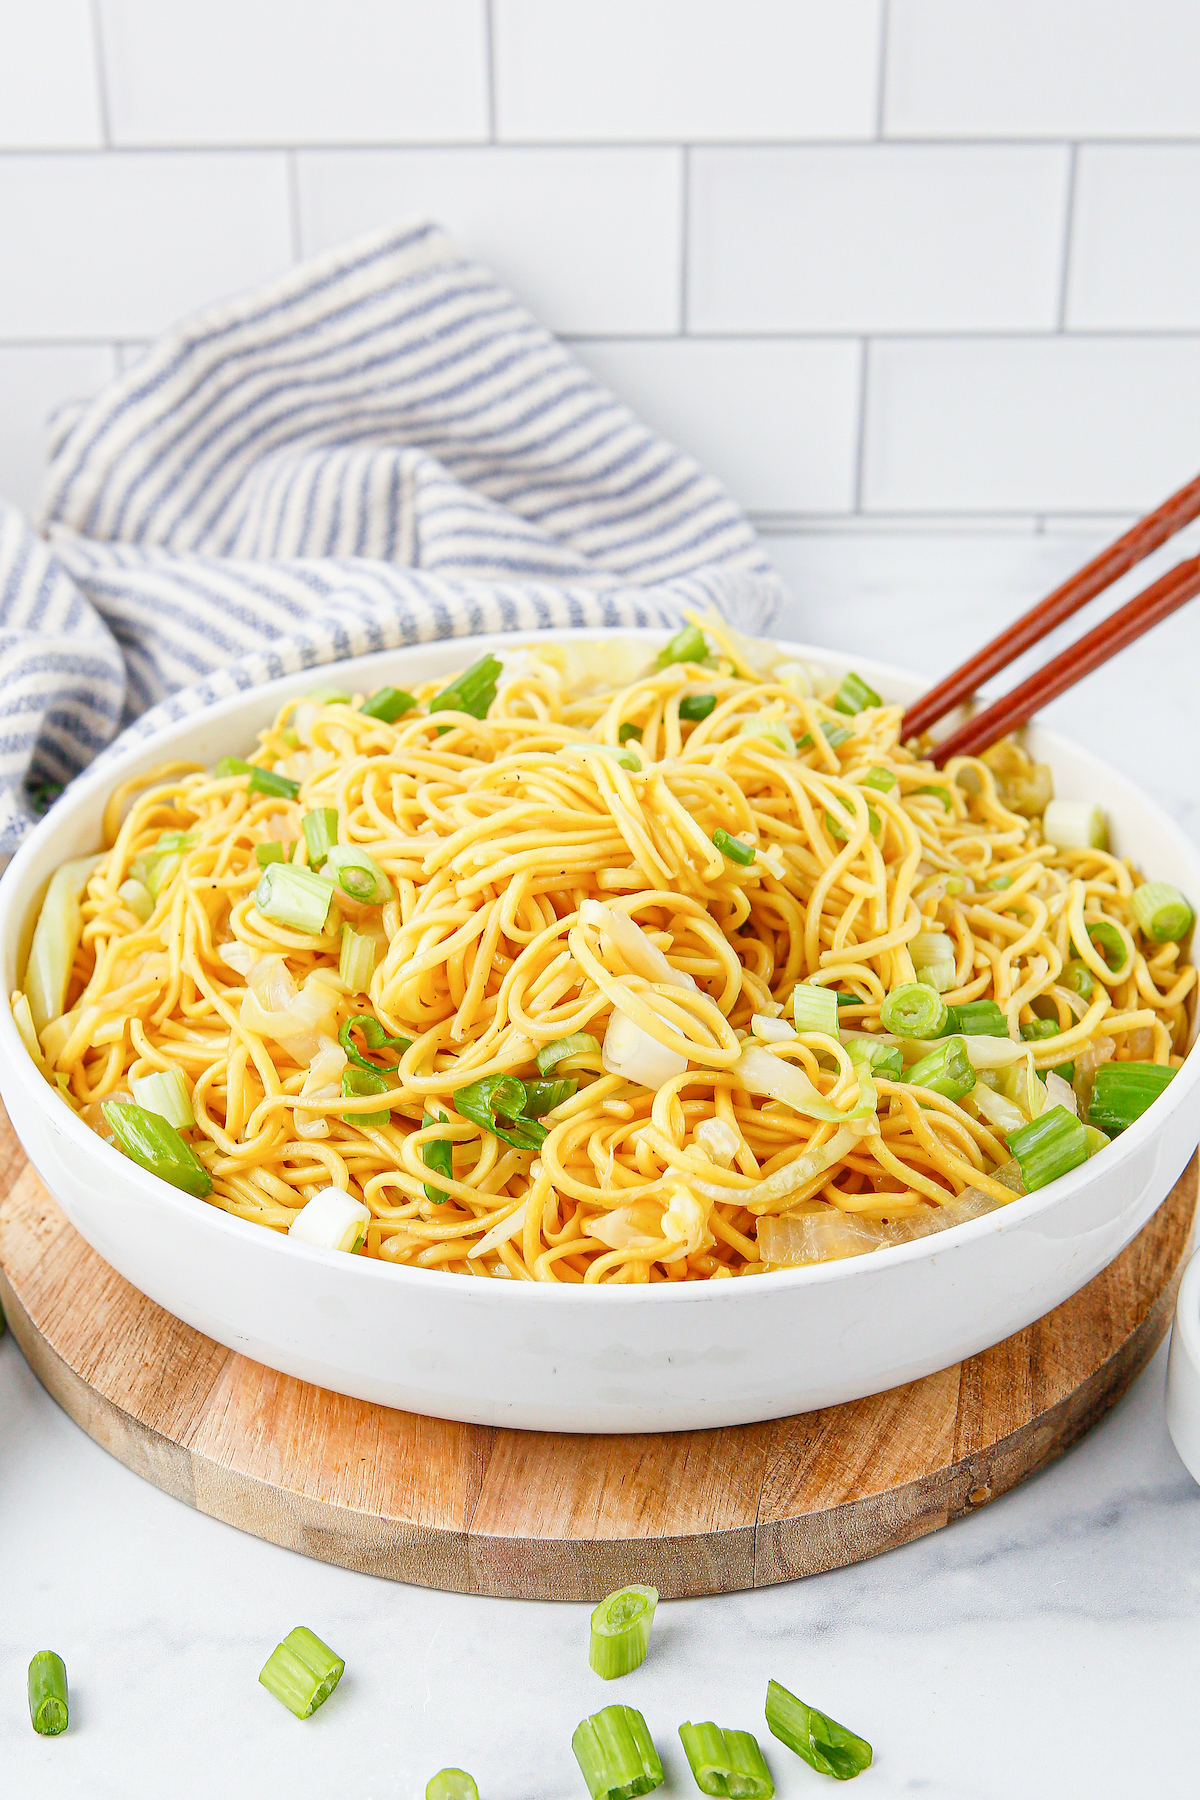 A shallow white serving bowl full of chow mein noodles that are garnished with sliced green onion and chopsticks.